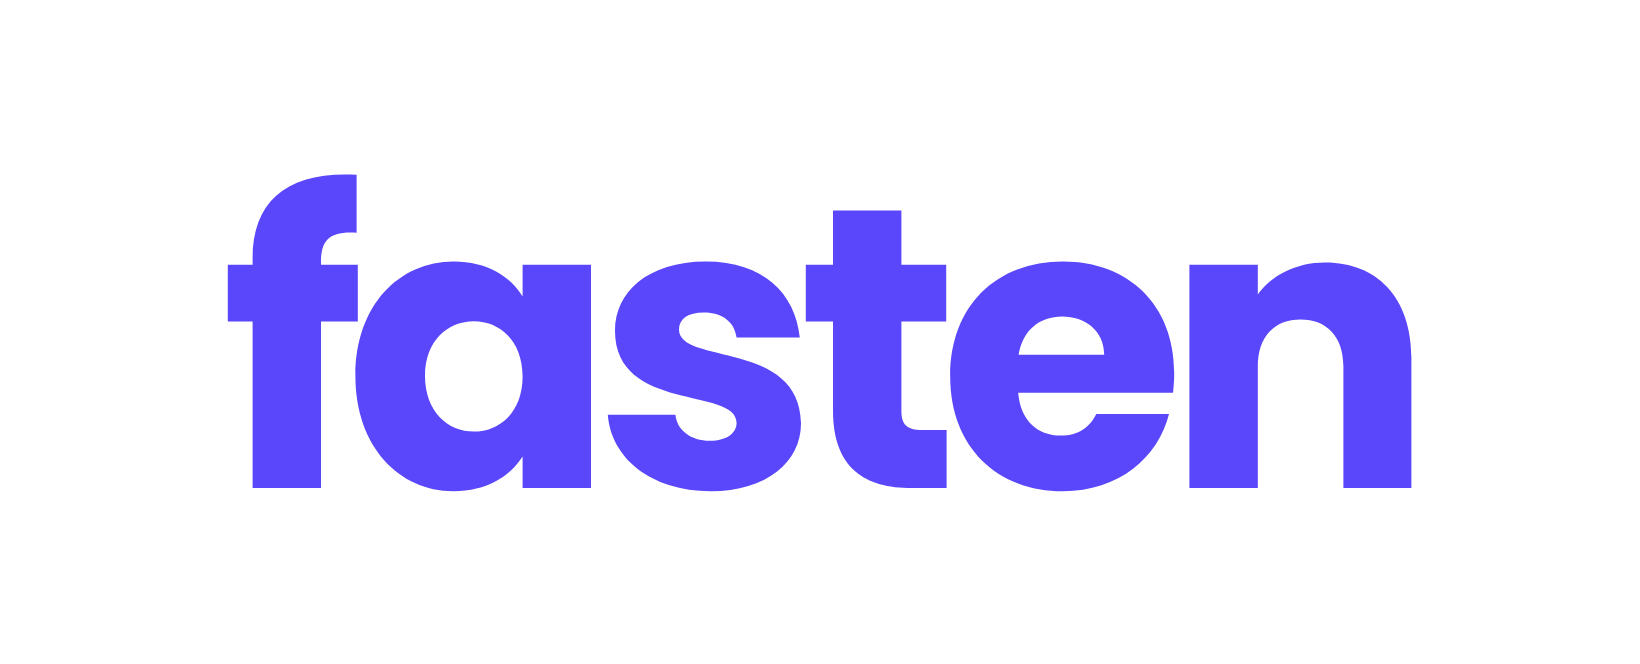 Fasten Health - Your Journey, Your Records, Your Control